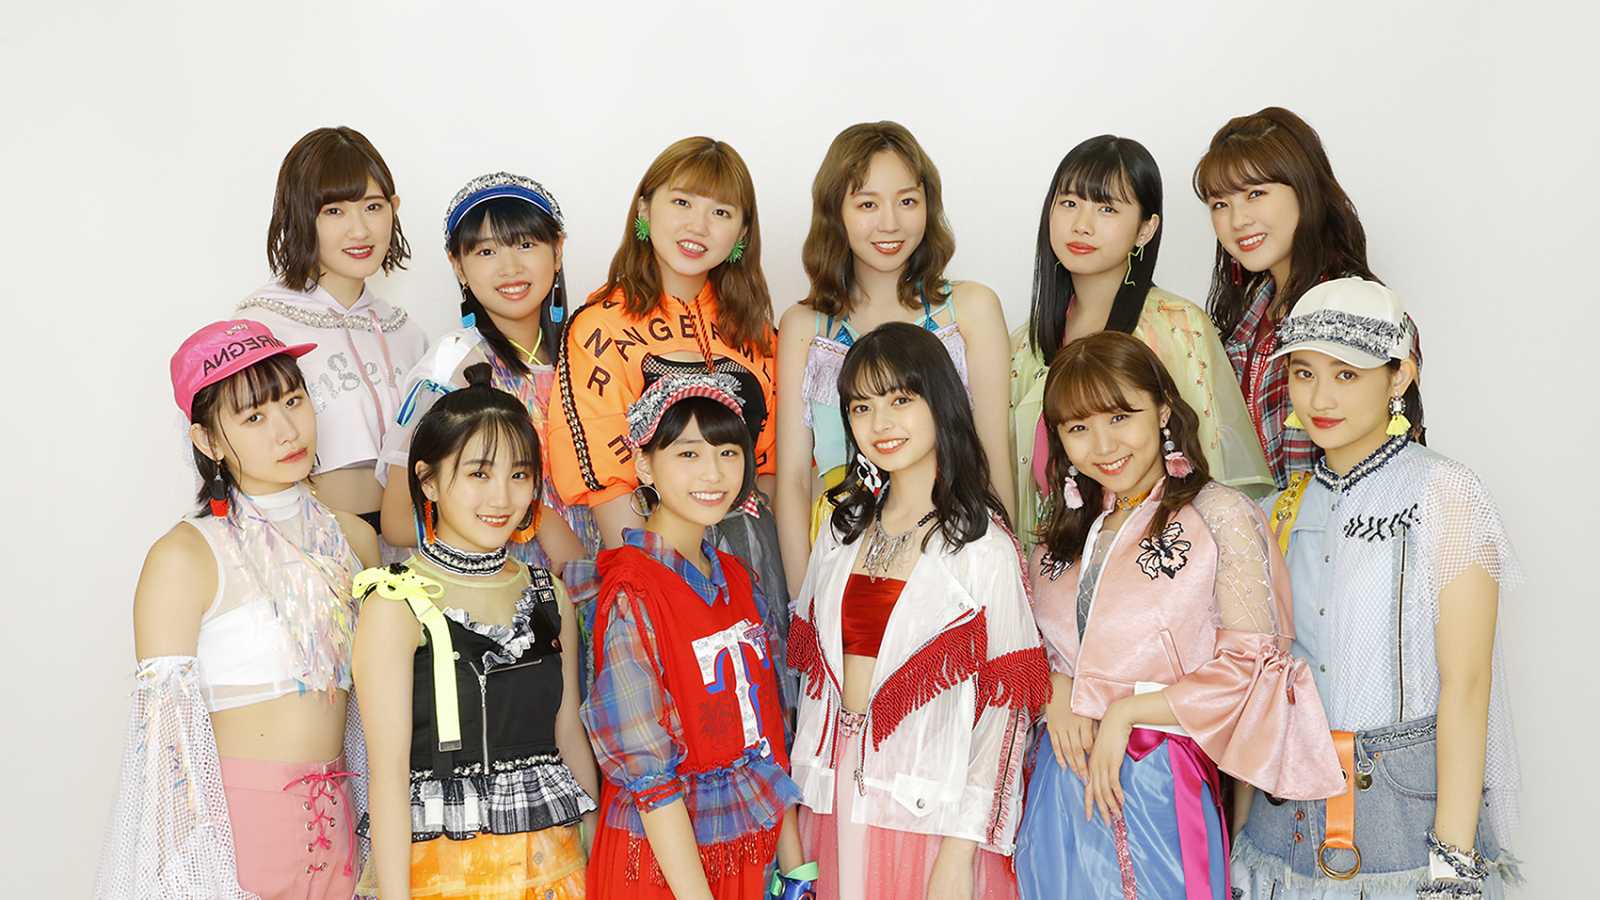 Interview avec ANGERME © DC FACTORY. All rights reserved.